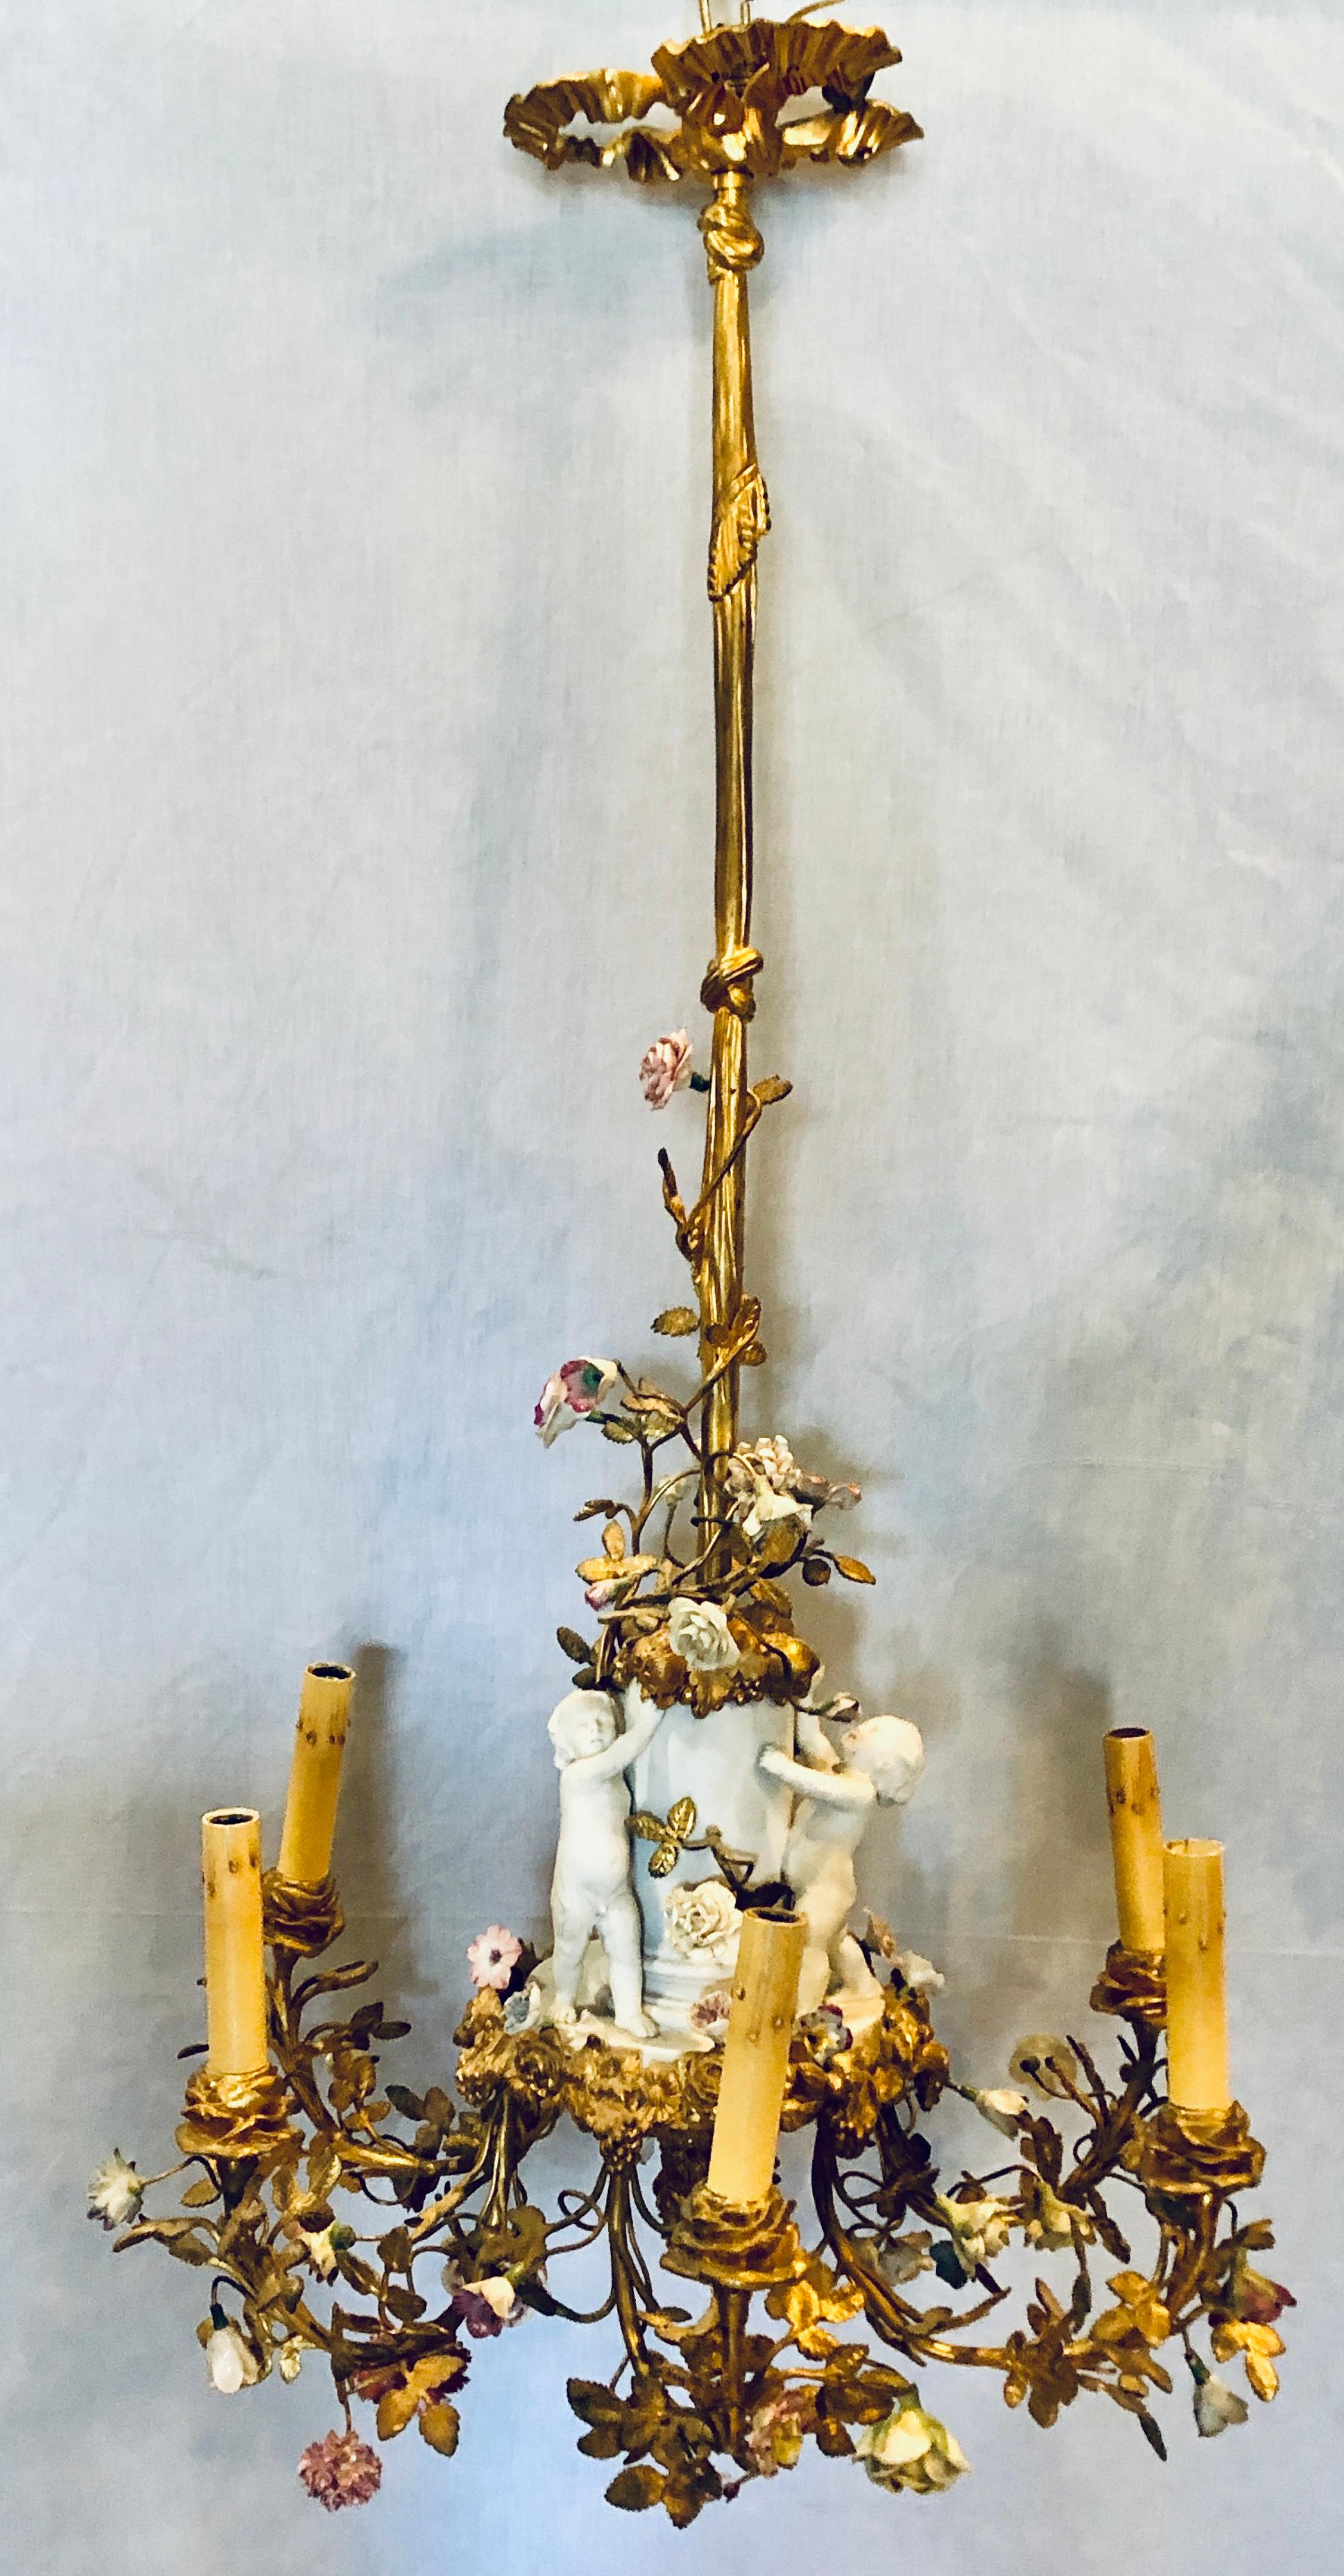 19th century gilt bronze and Meissen with a Sevres Parian figural centerpiece chandelier. This finely cast dore bronze chandelier has a long Louis XVI rod with a ribbon bow canopy supporting a sevres parian center piece having dancing cherubs